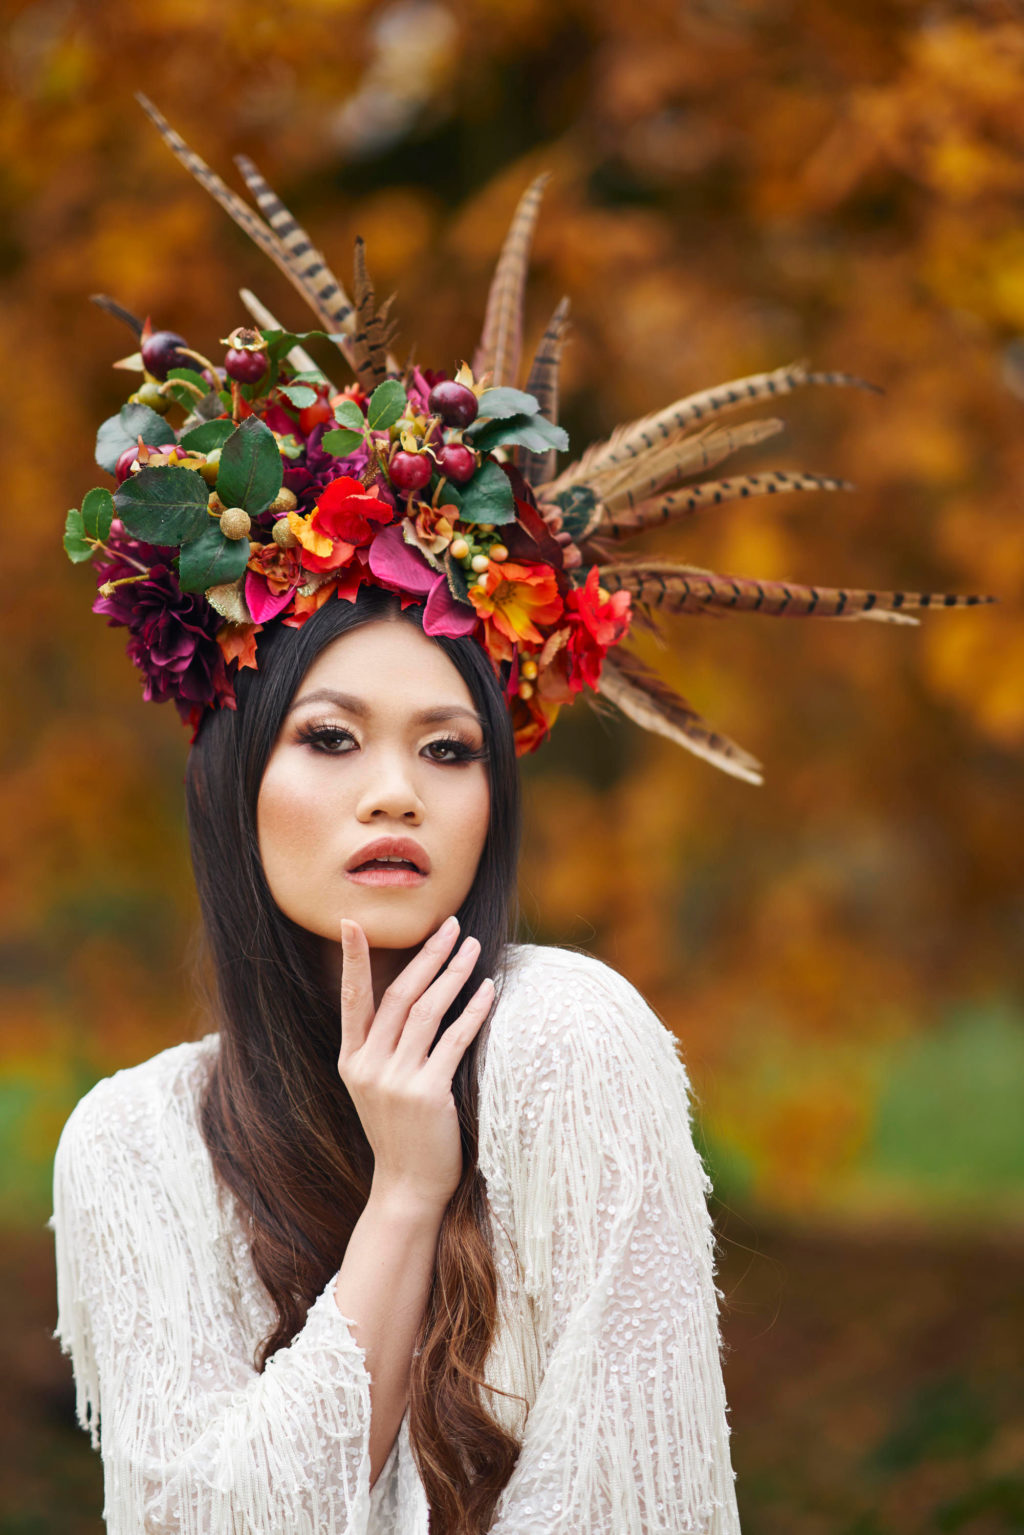 Alternative Christmas Wedding Styled Shoot in reds and golds with large feather headpiece